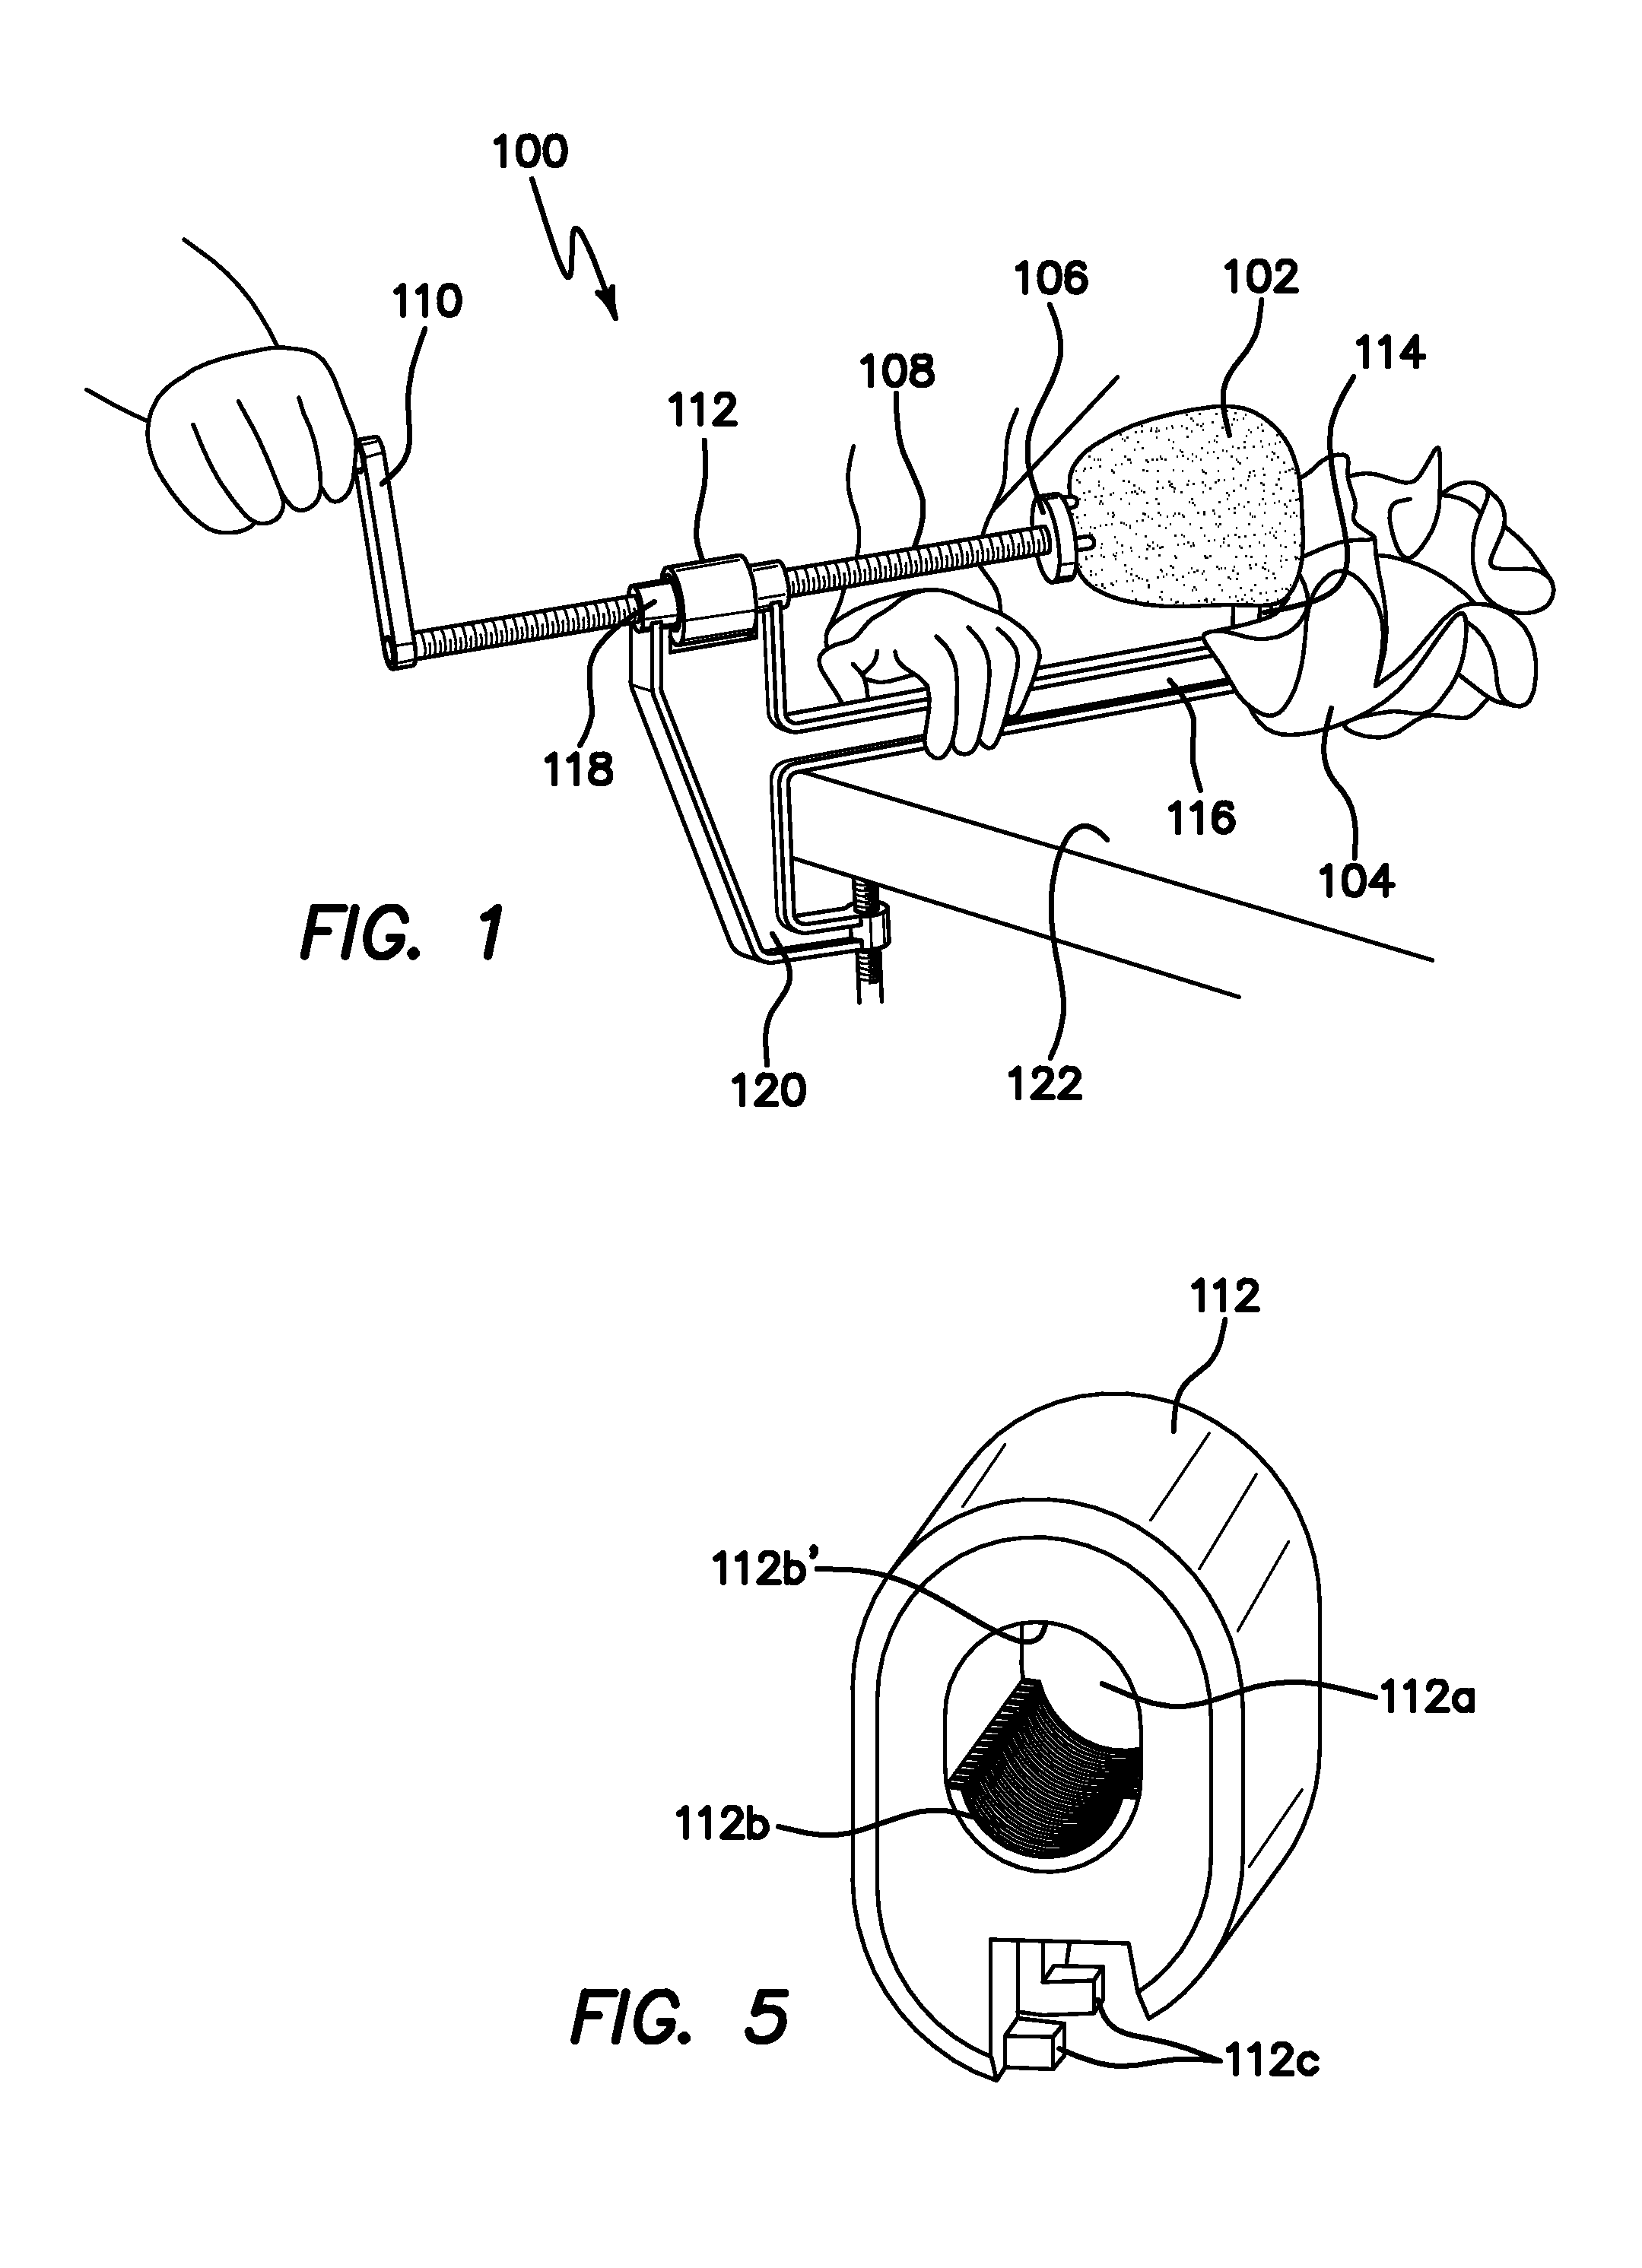 Apparatus and method for cutting produce in a continuous curl for the purpose of making a curly spiraled potato chip